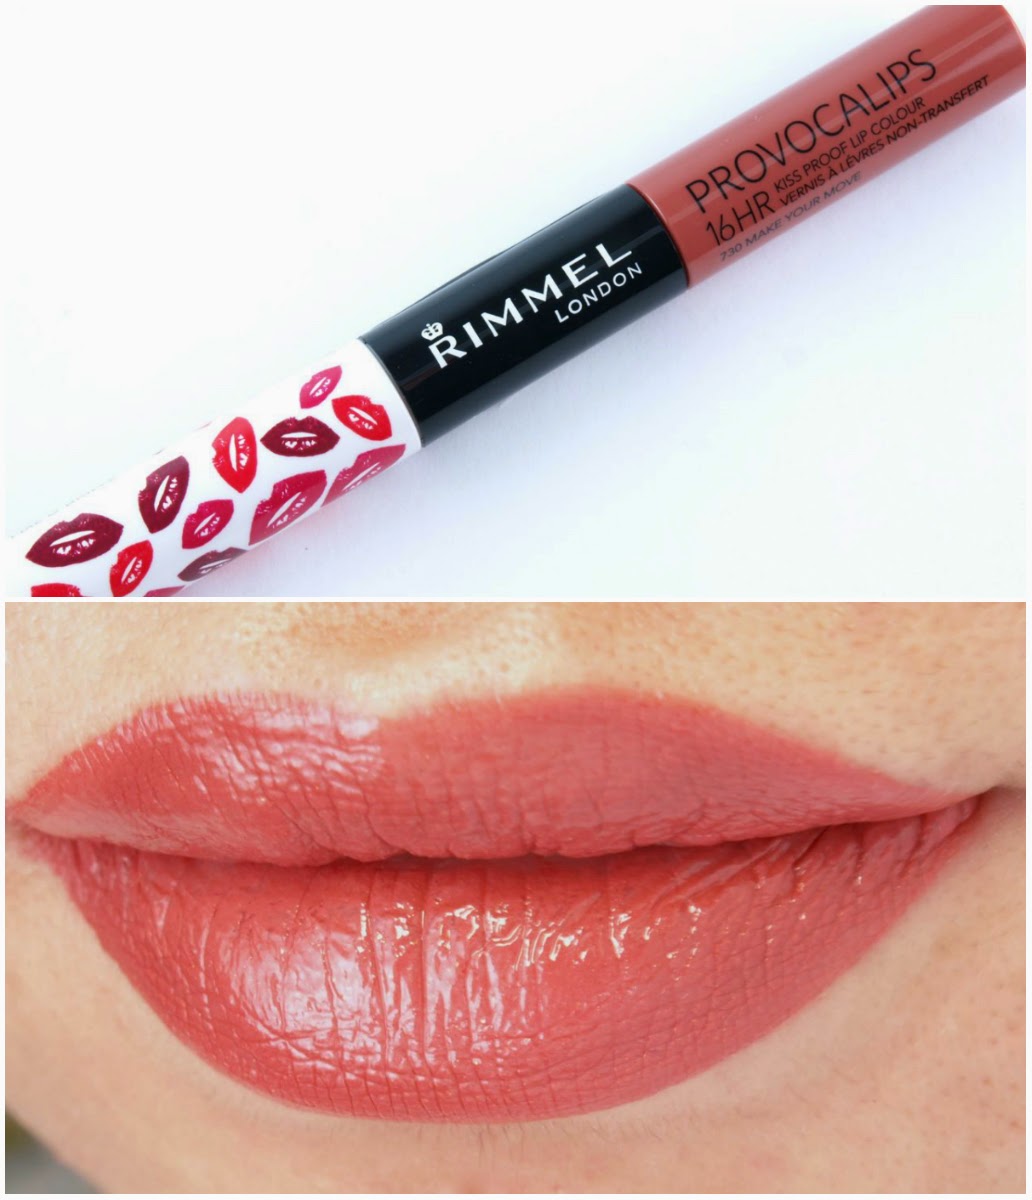 Rimmel Provocalips 16Hr Kiss Proof Lip Color: Review and Swatches Make Your Move